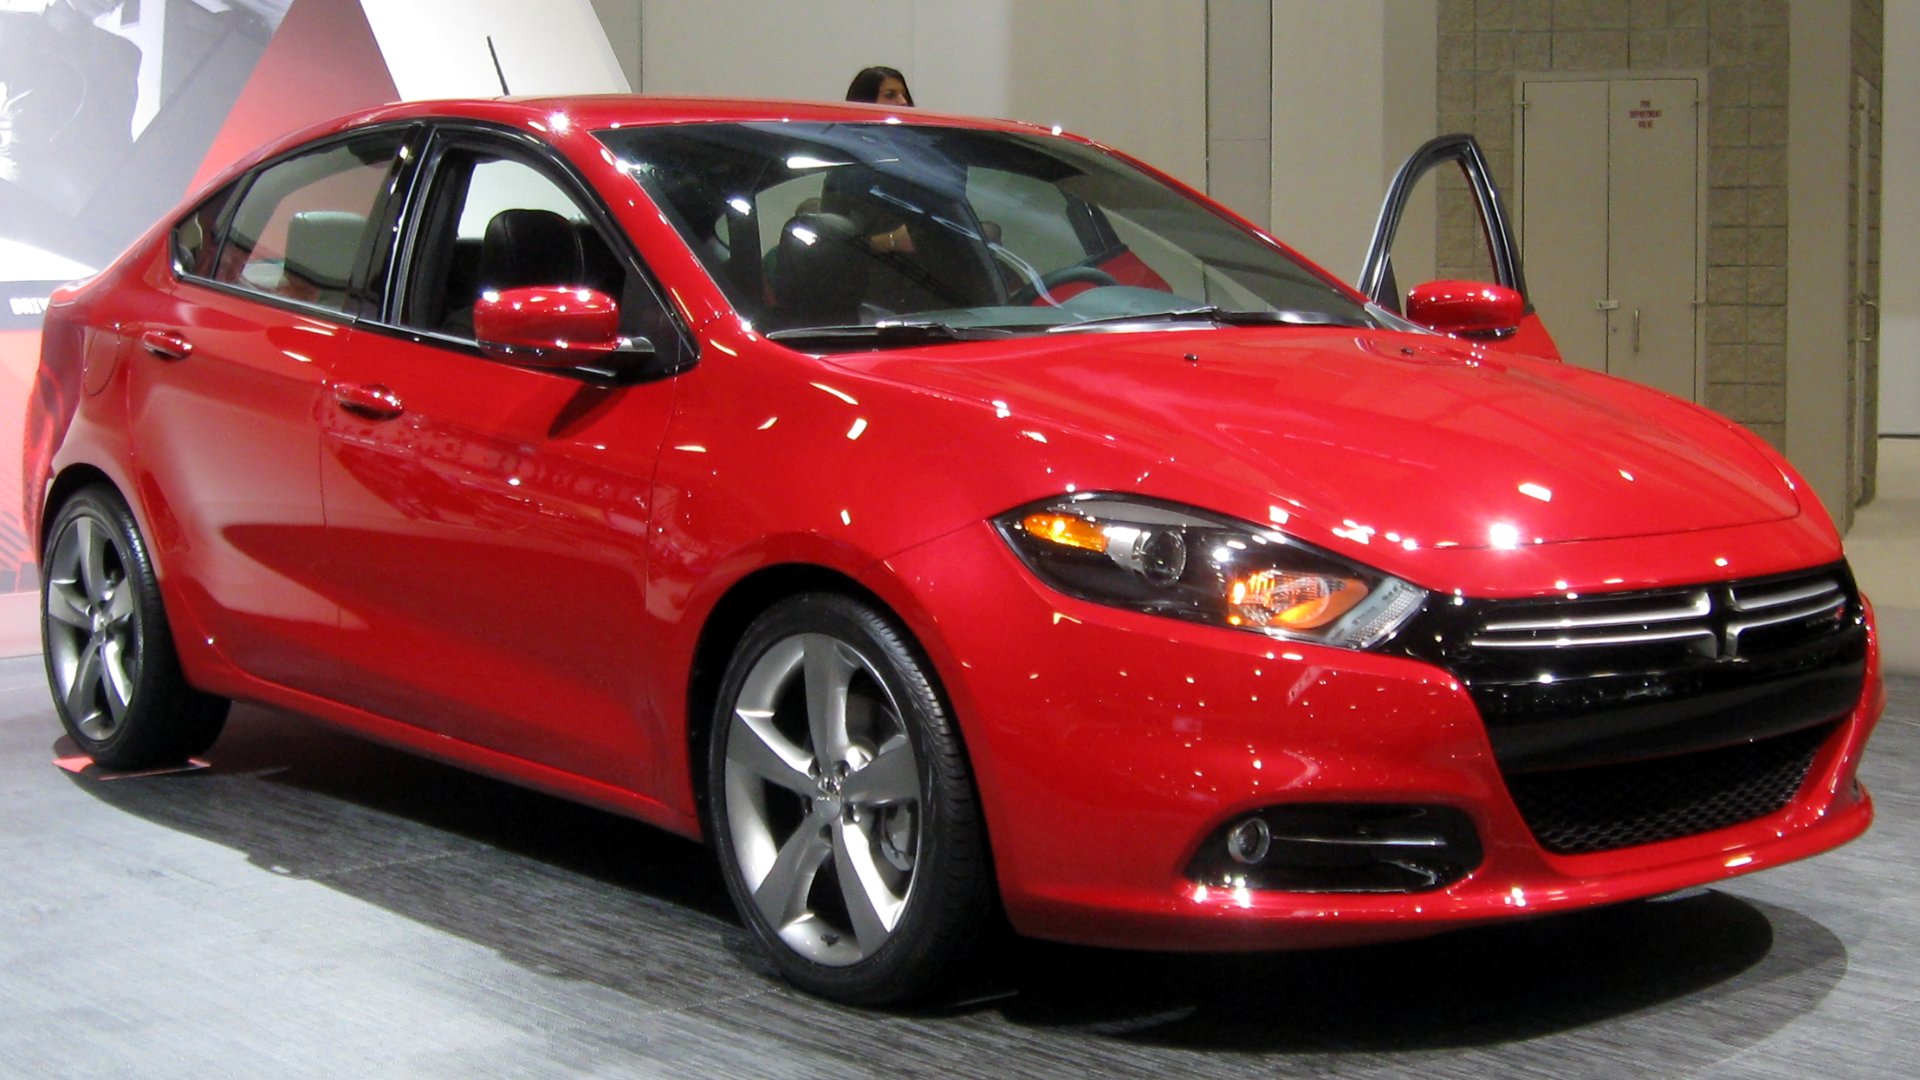 a red car is on display at a show.